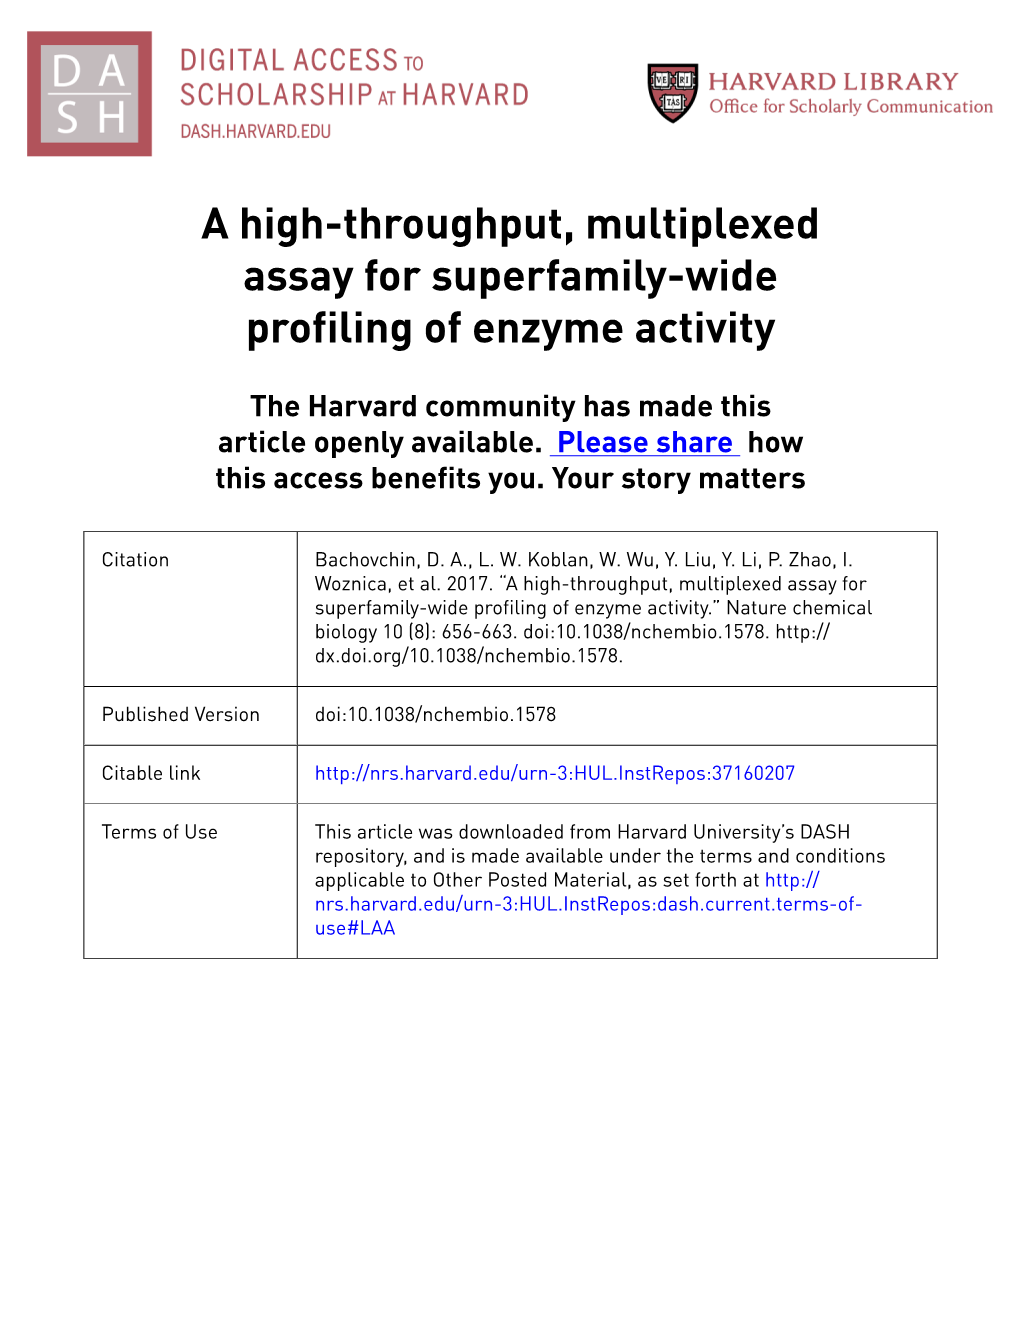 A High-Throughput, Multiplexed Assay for Superfamily-Wide Profiling of Enzyme Activity